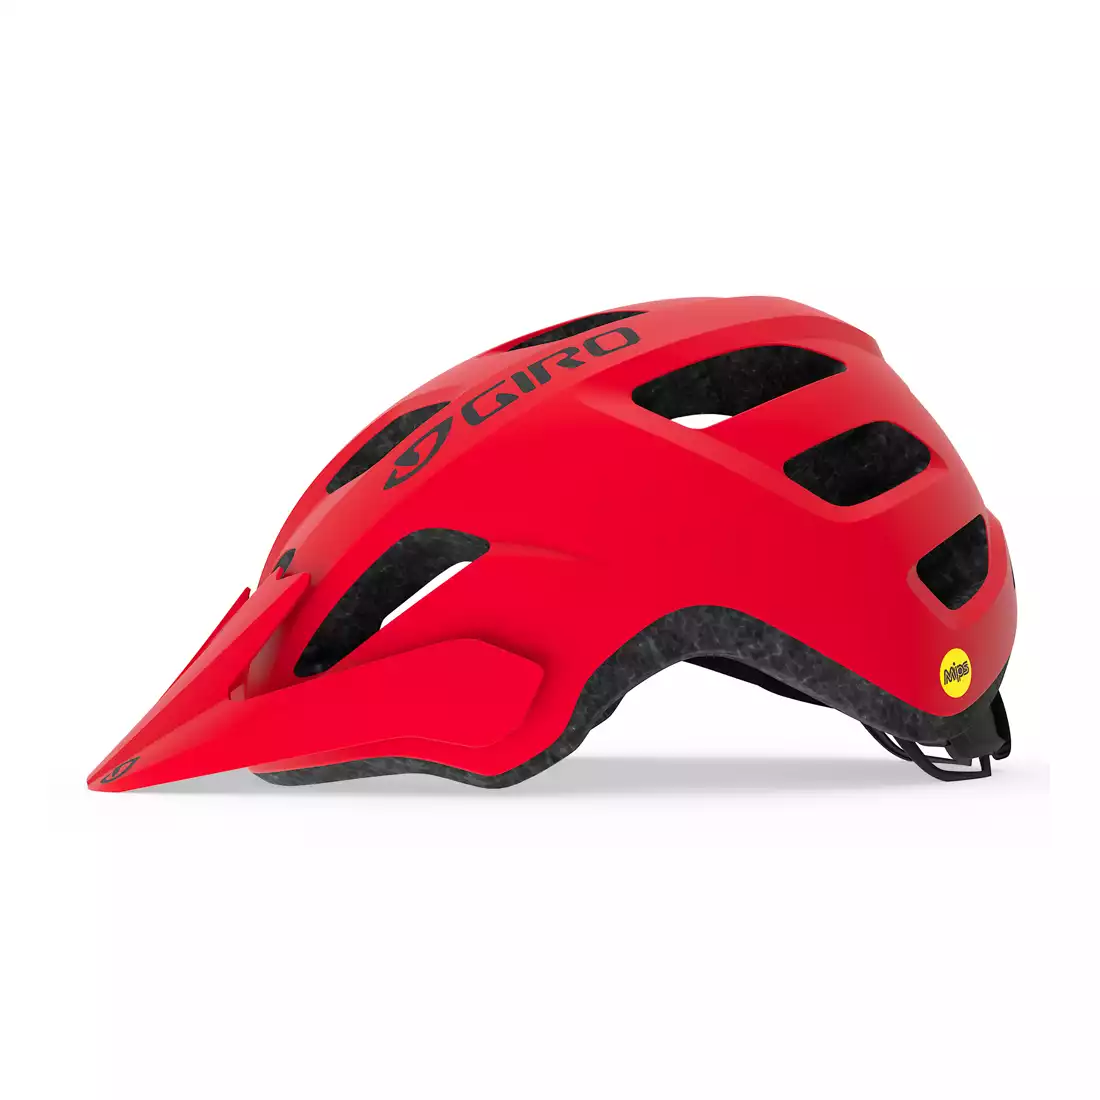 Kask rowerowy GIRO TREMOR matte bright red 